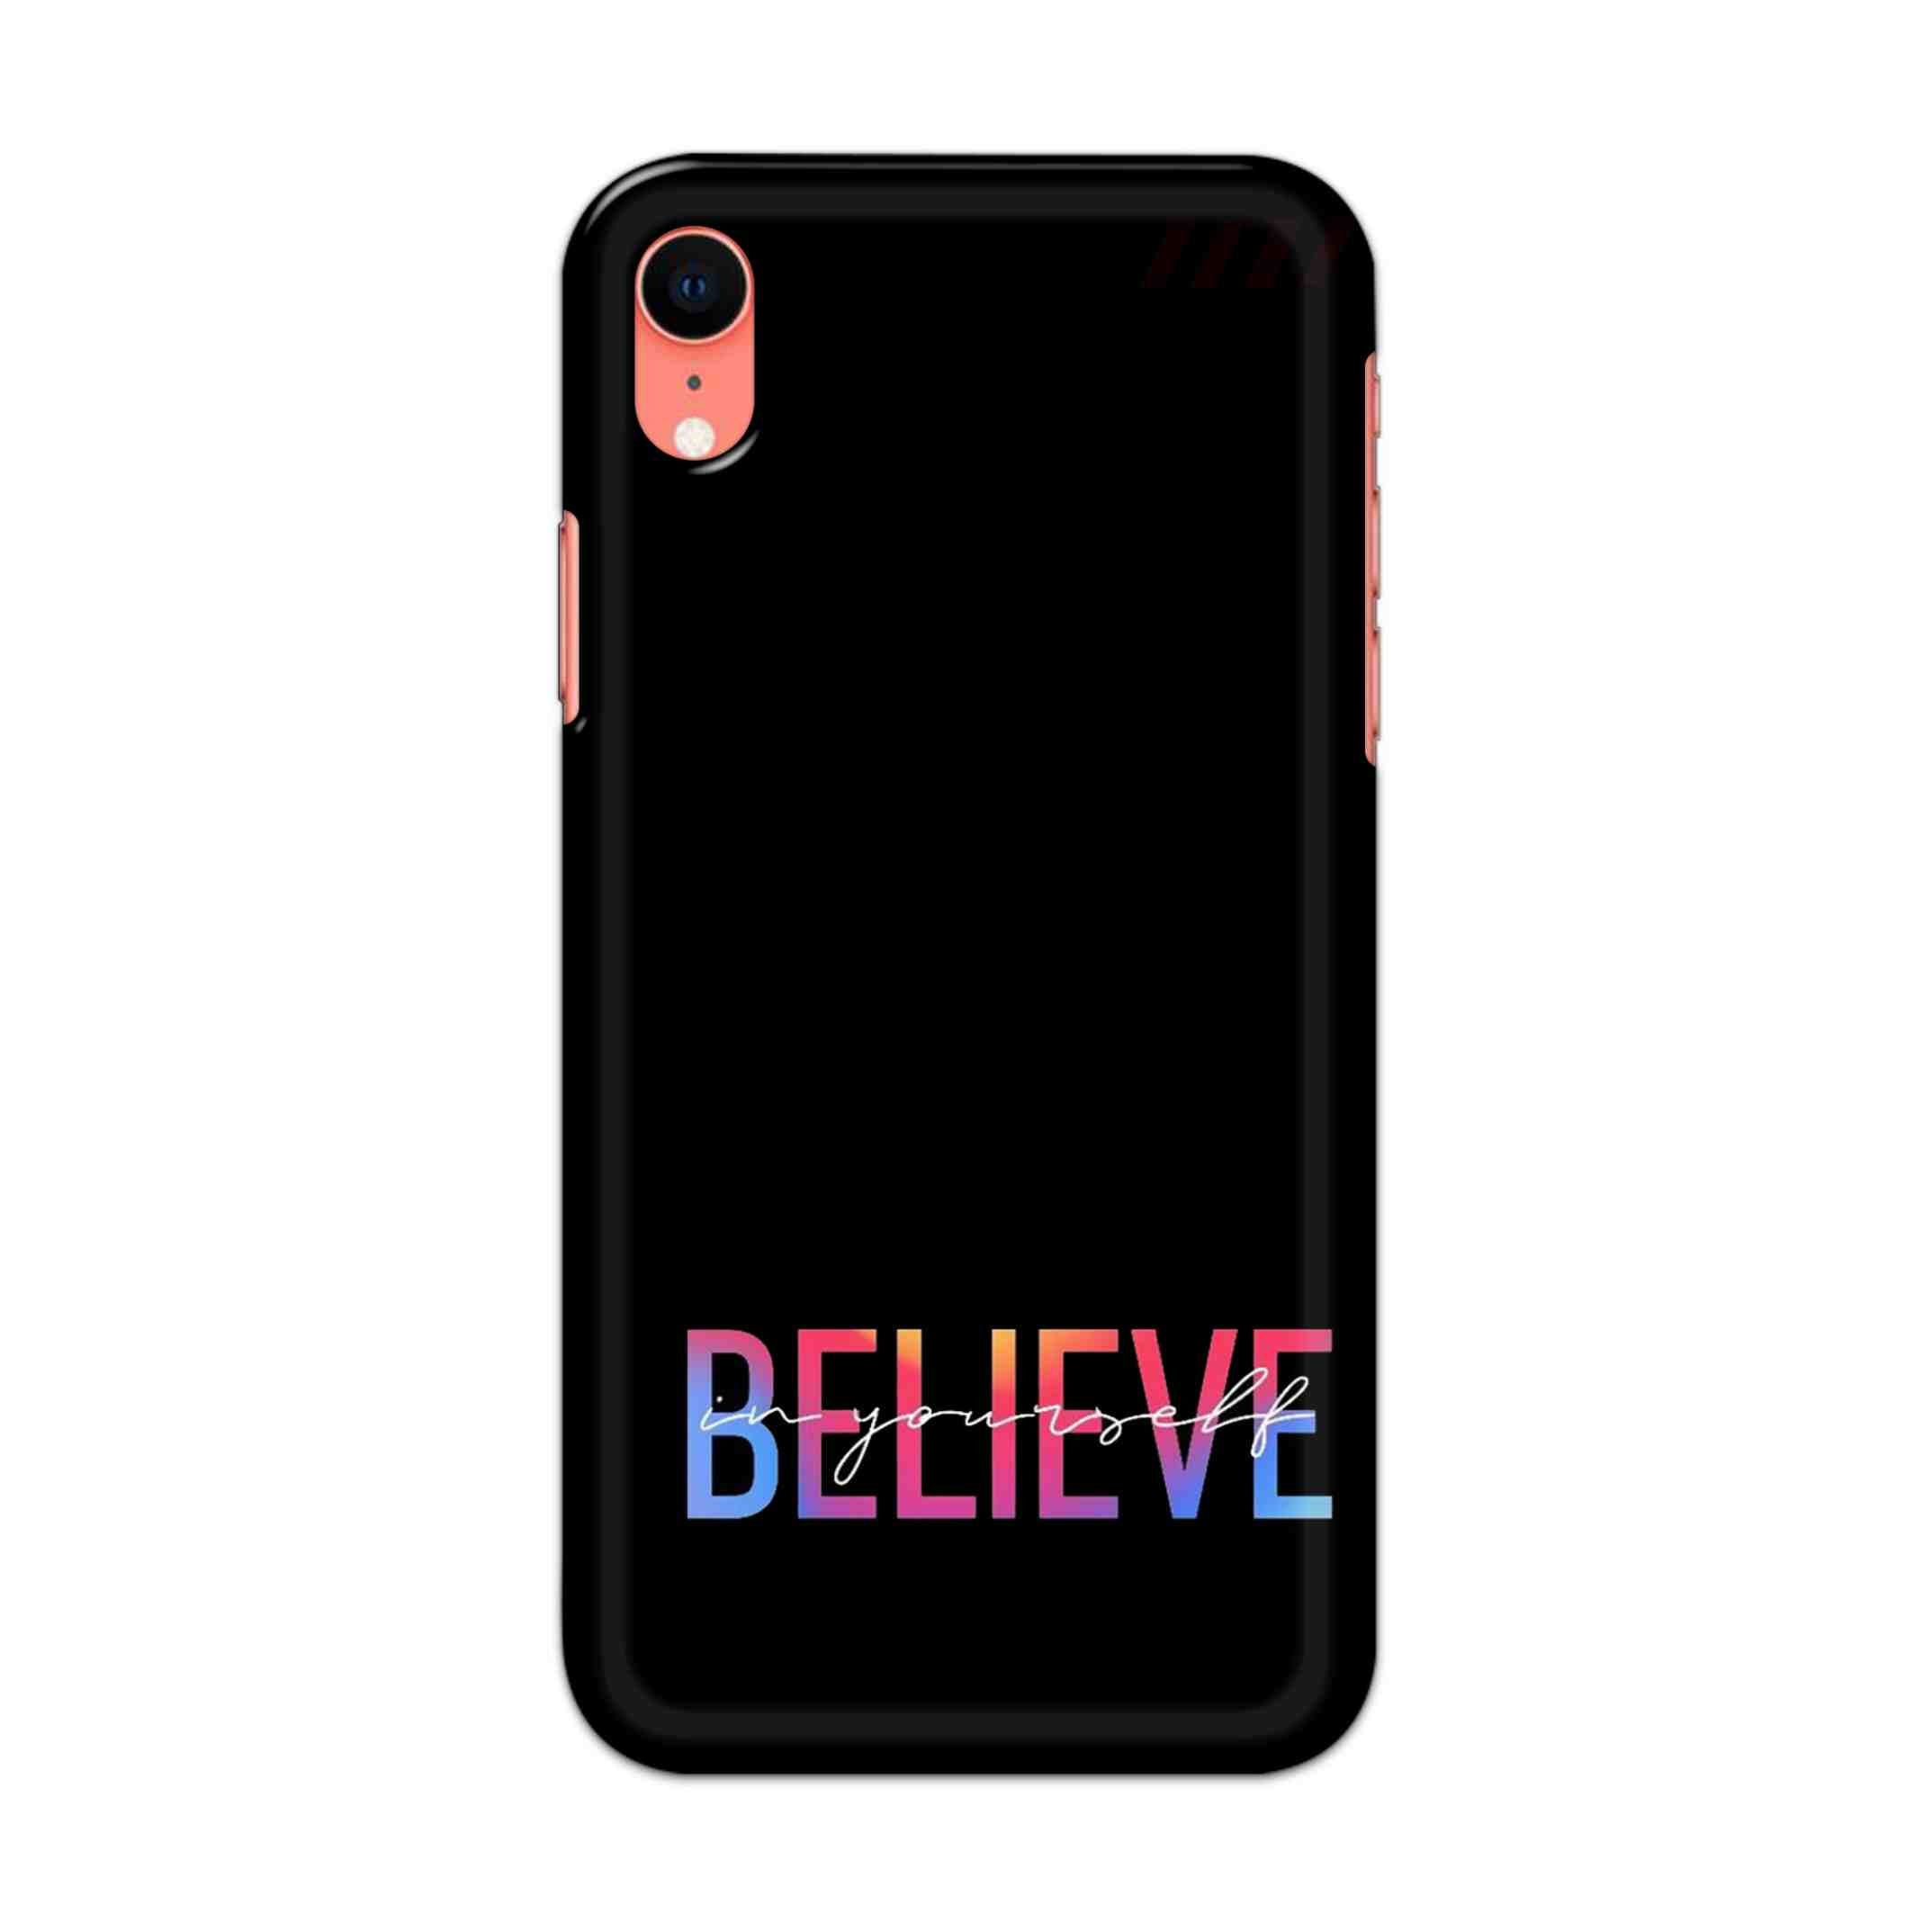 Buy Believe Hard Back Mobile Phone Case/Cover For iPhone XR Online